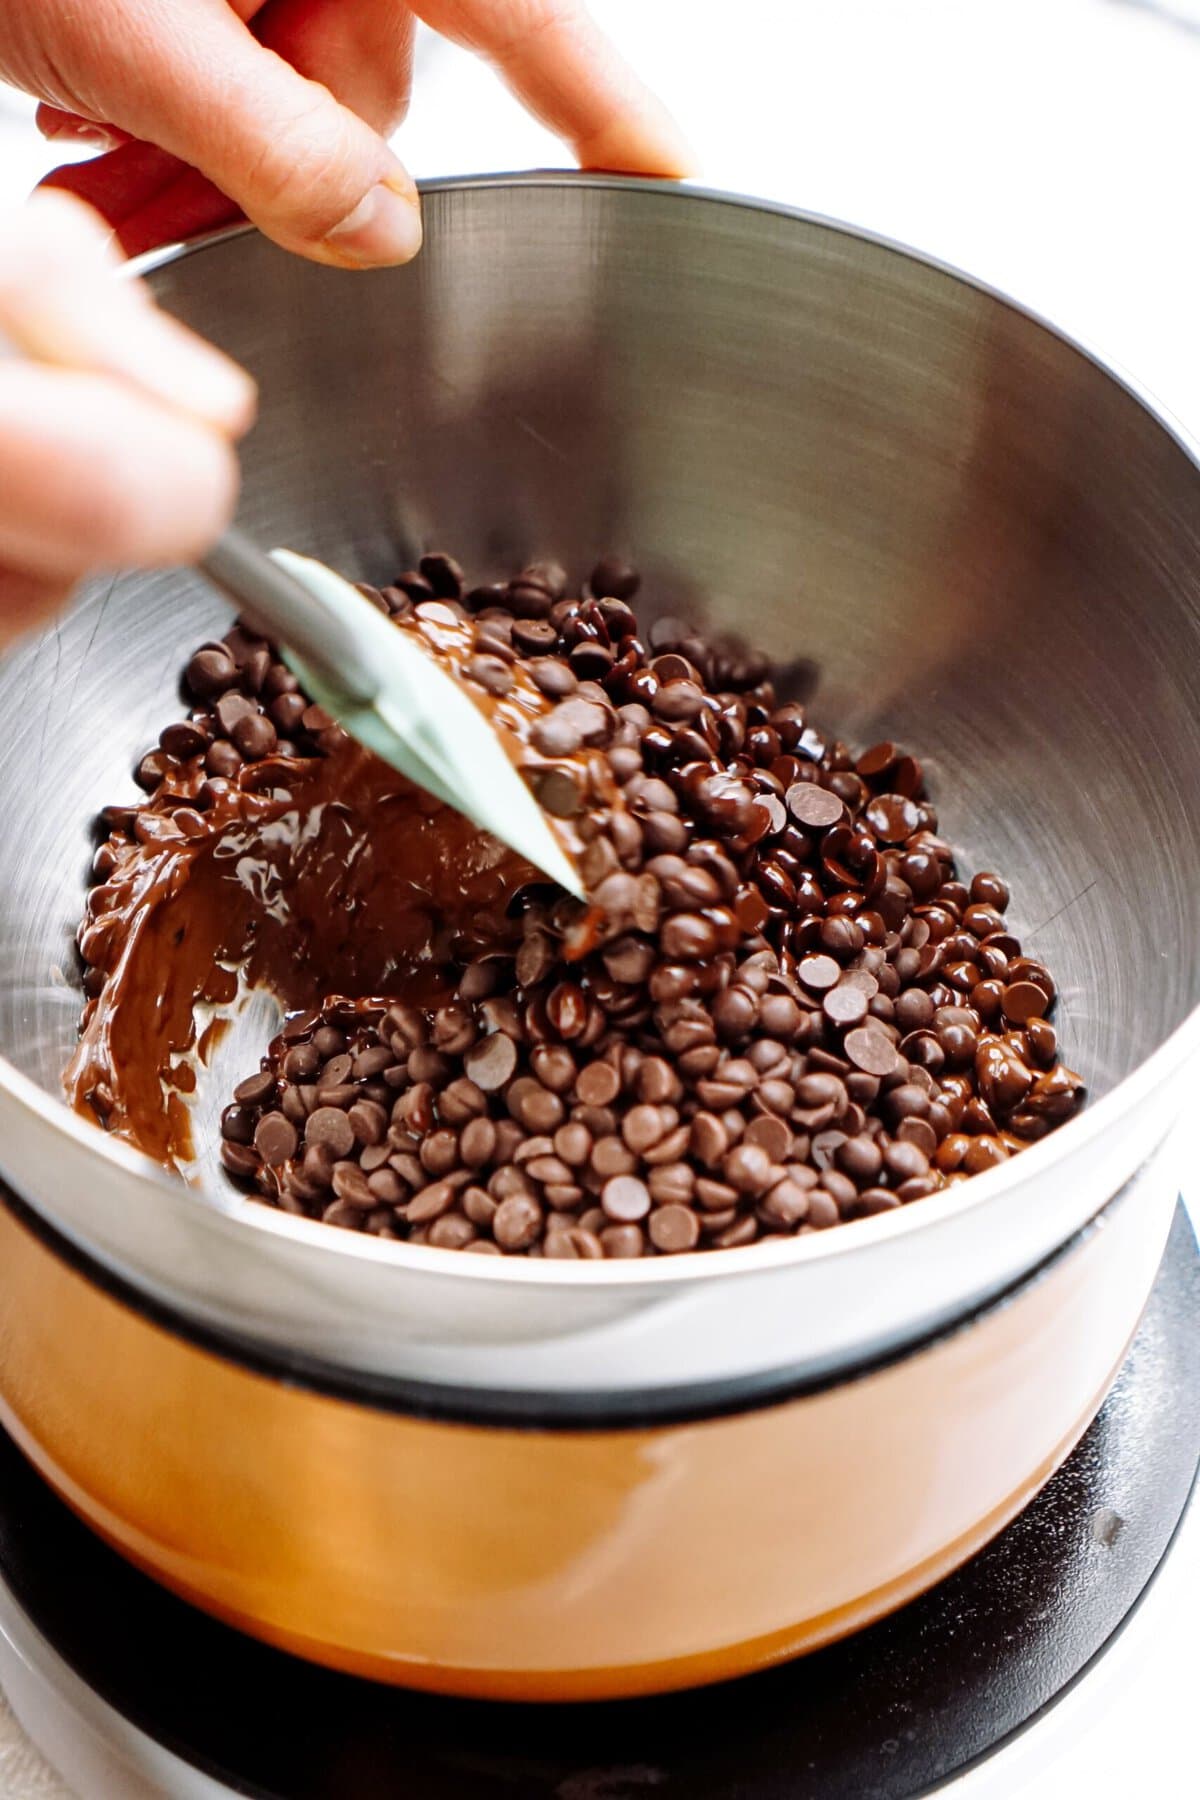 A person stirring chocolate chips in a double boiler to melt them.